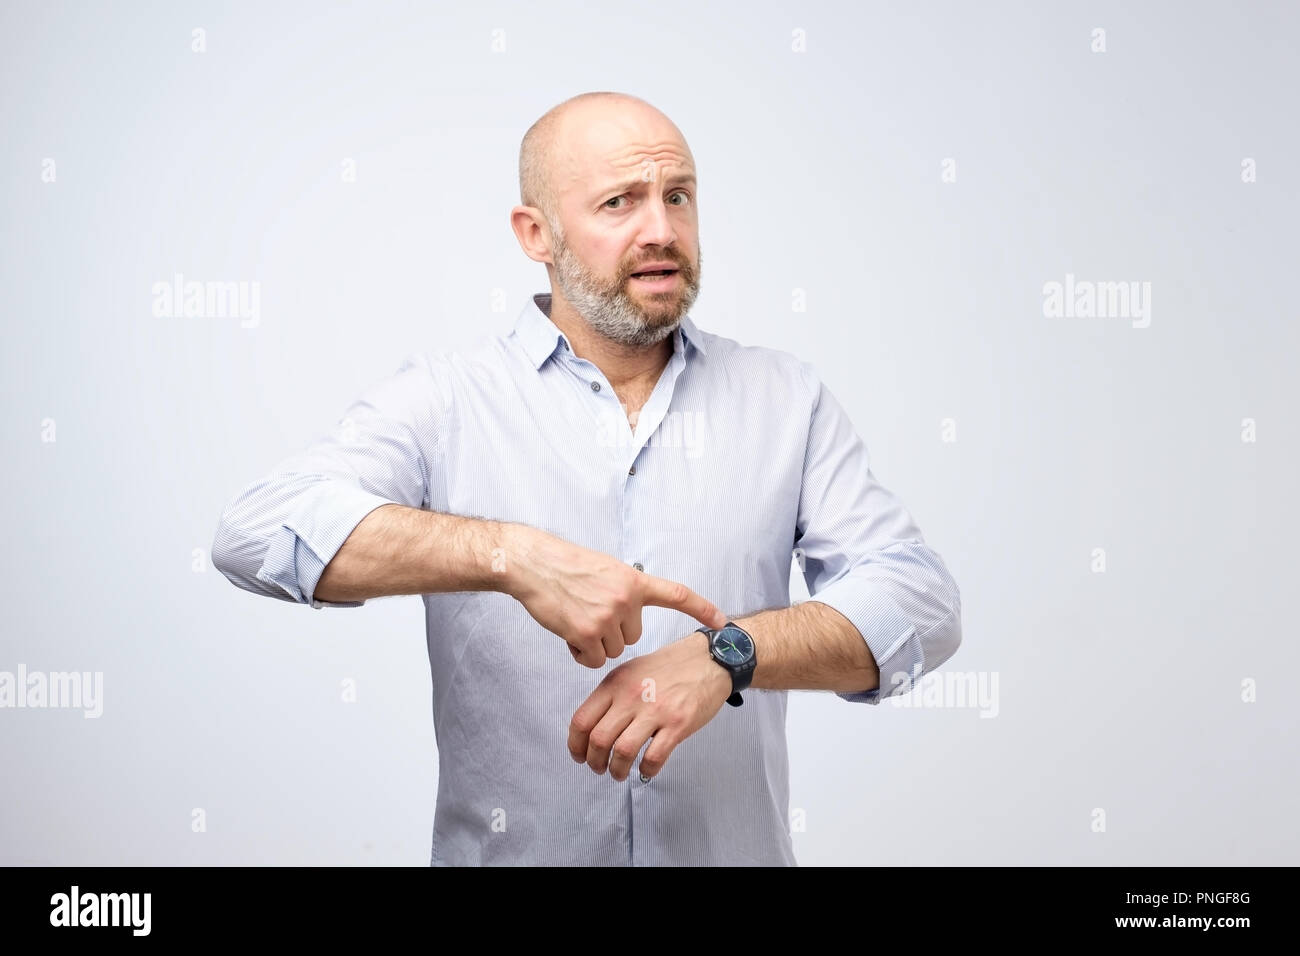 Mature european businessman impatiently pointing to his watch. Why are you late concept. I am waiting here for hours. Stock Photo